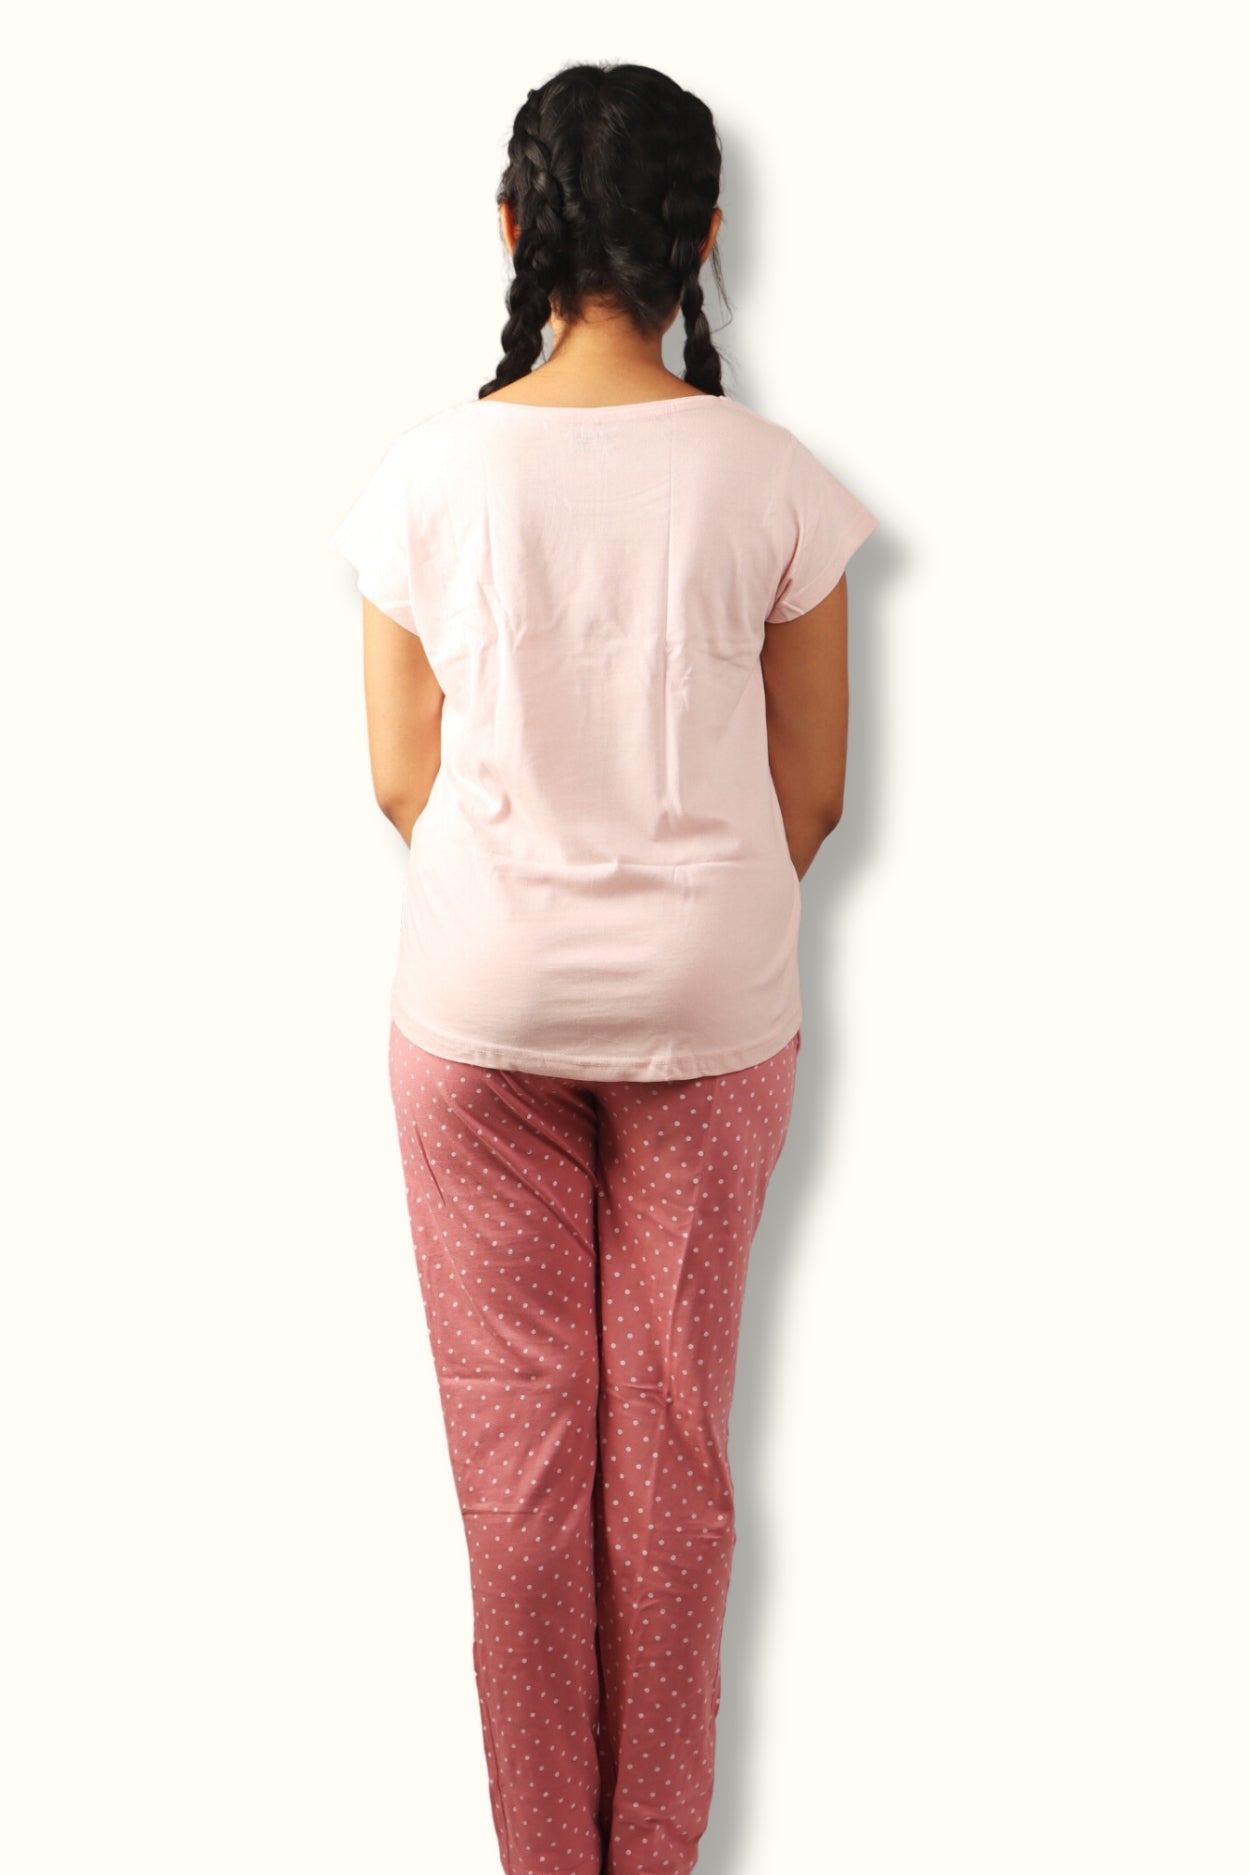 Night Suit For Women In Pink Colour - Let The Weekend Begin - Variant 1